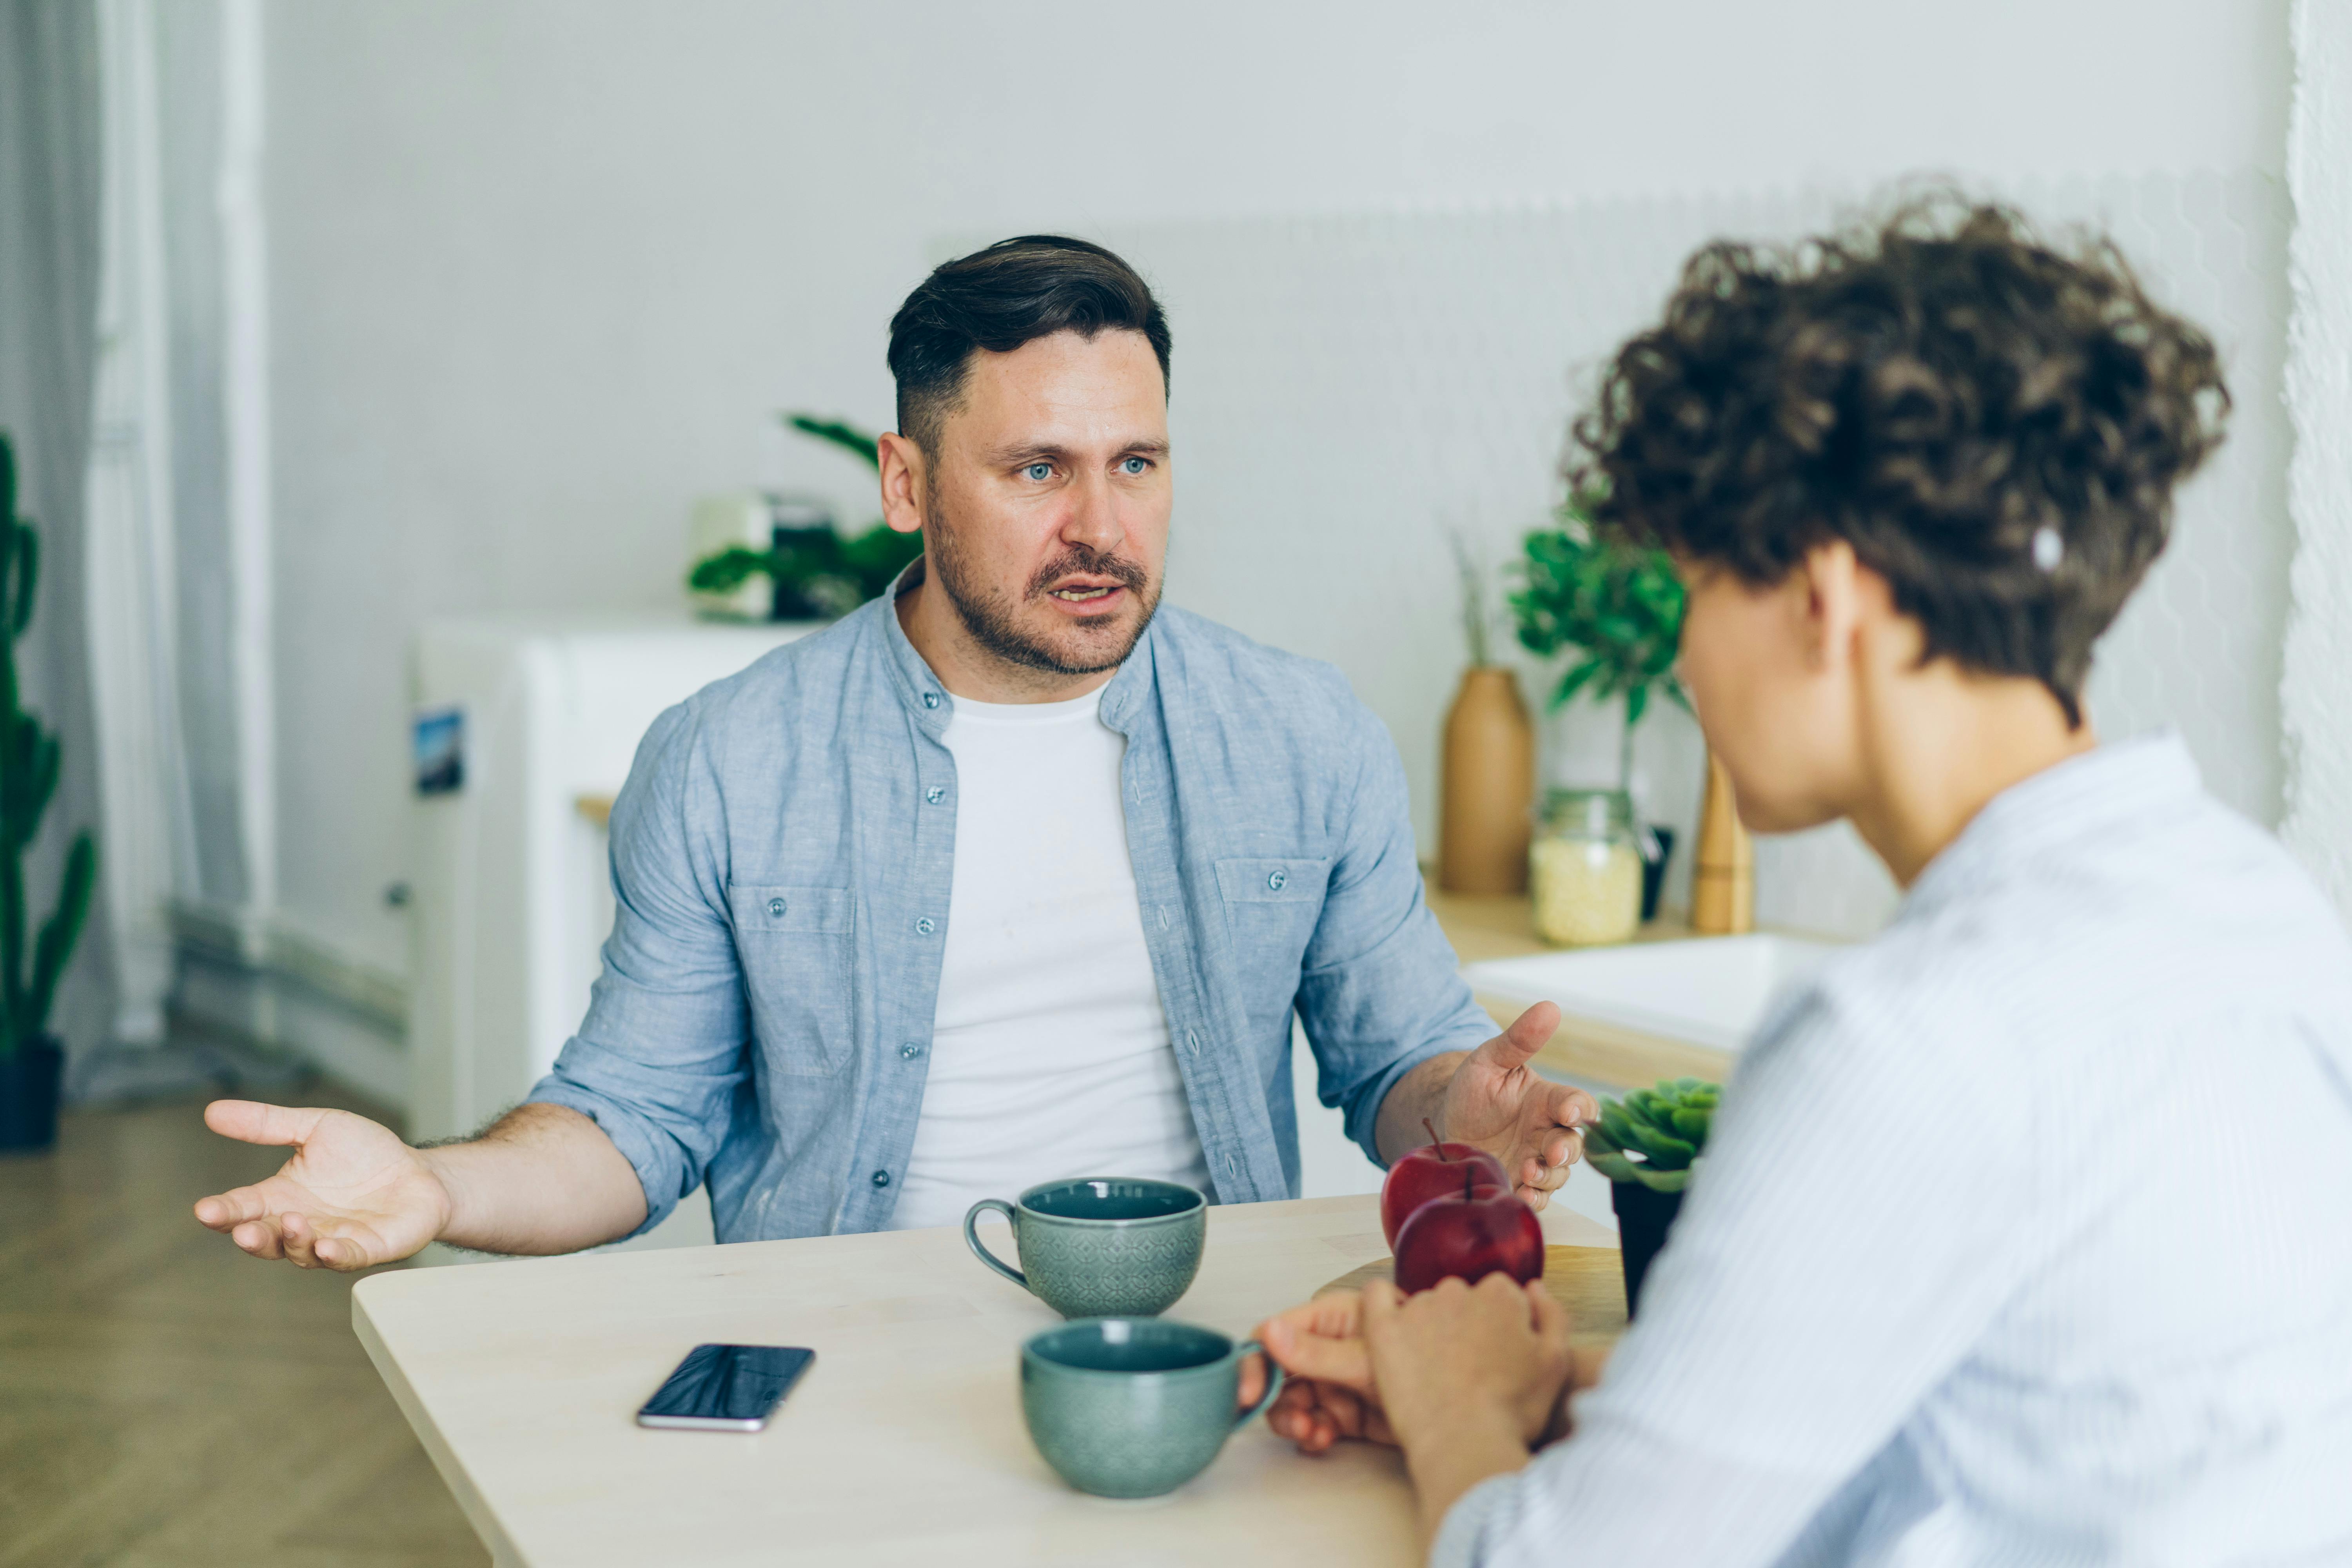 A man and woman arguing in the kitchen | Source: Pexels